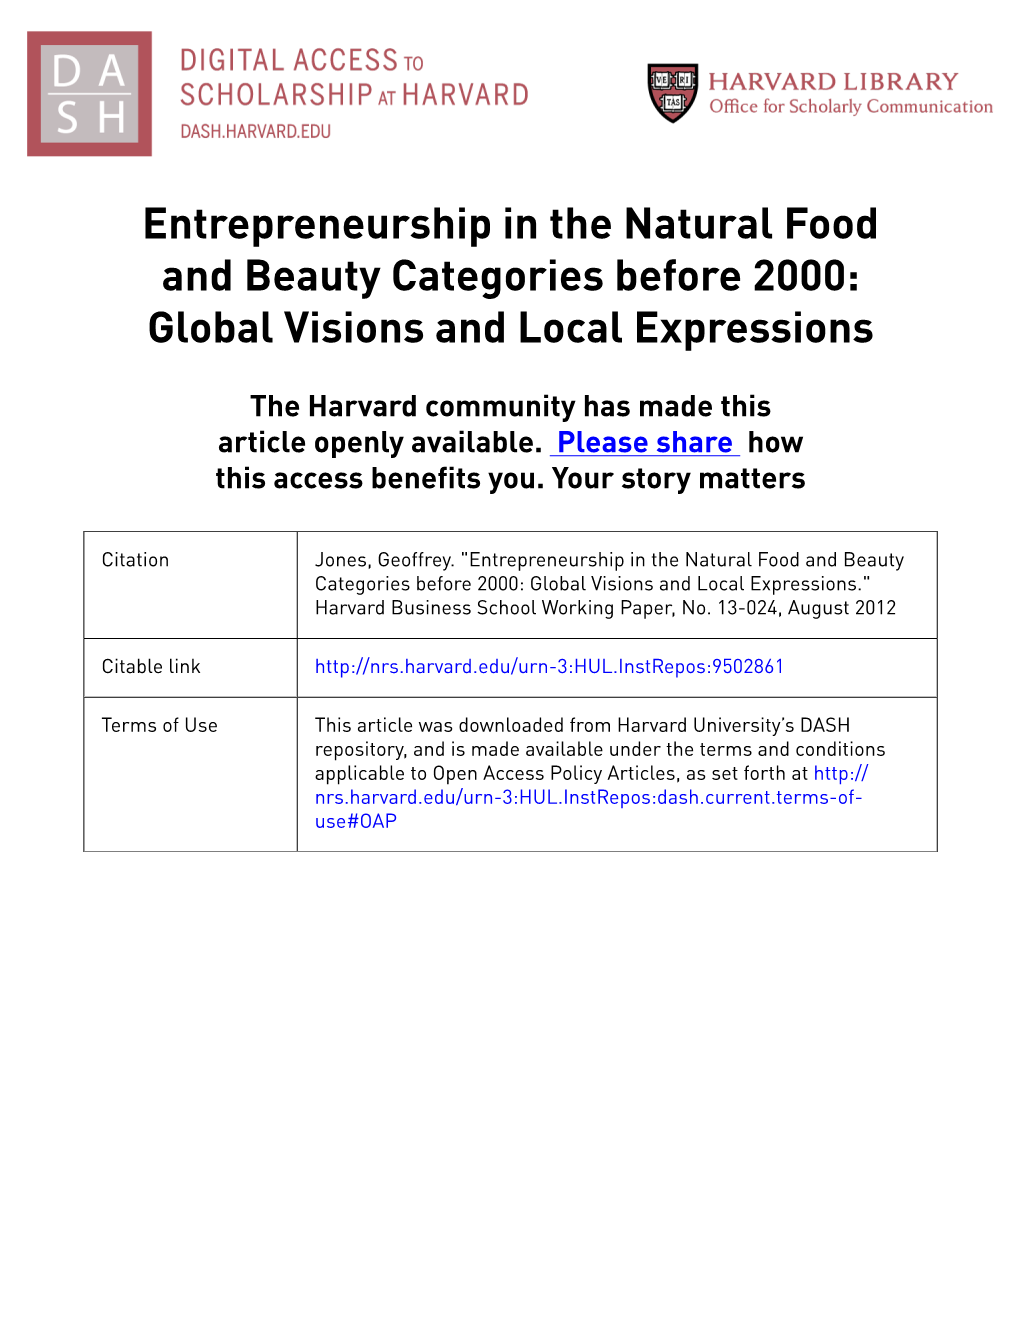 Entrepreneurship in the Natural Food and Beauty Categories Before 2000: Global Visions and Local Expressions